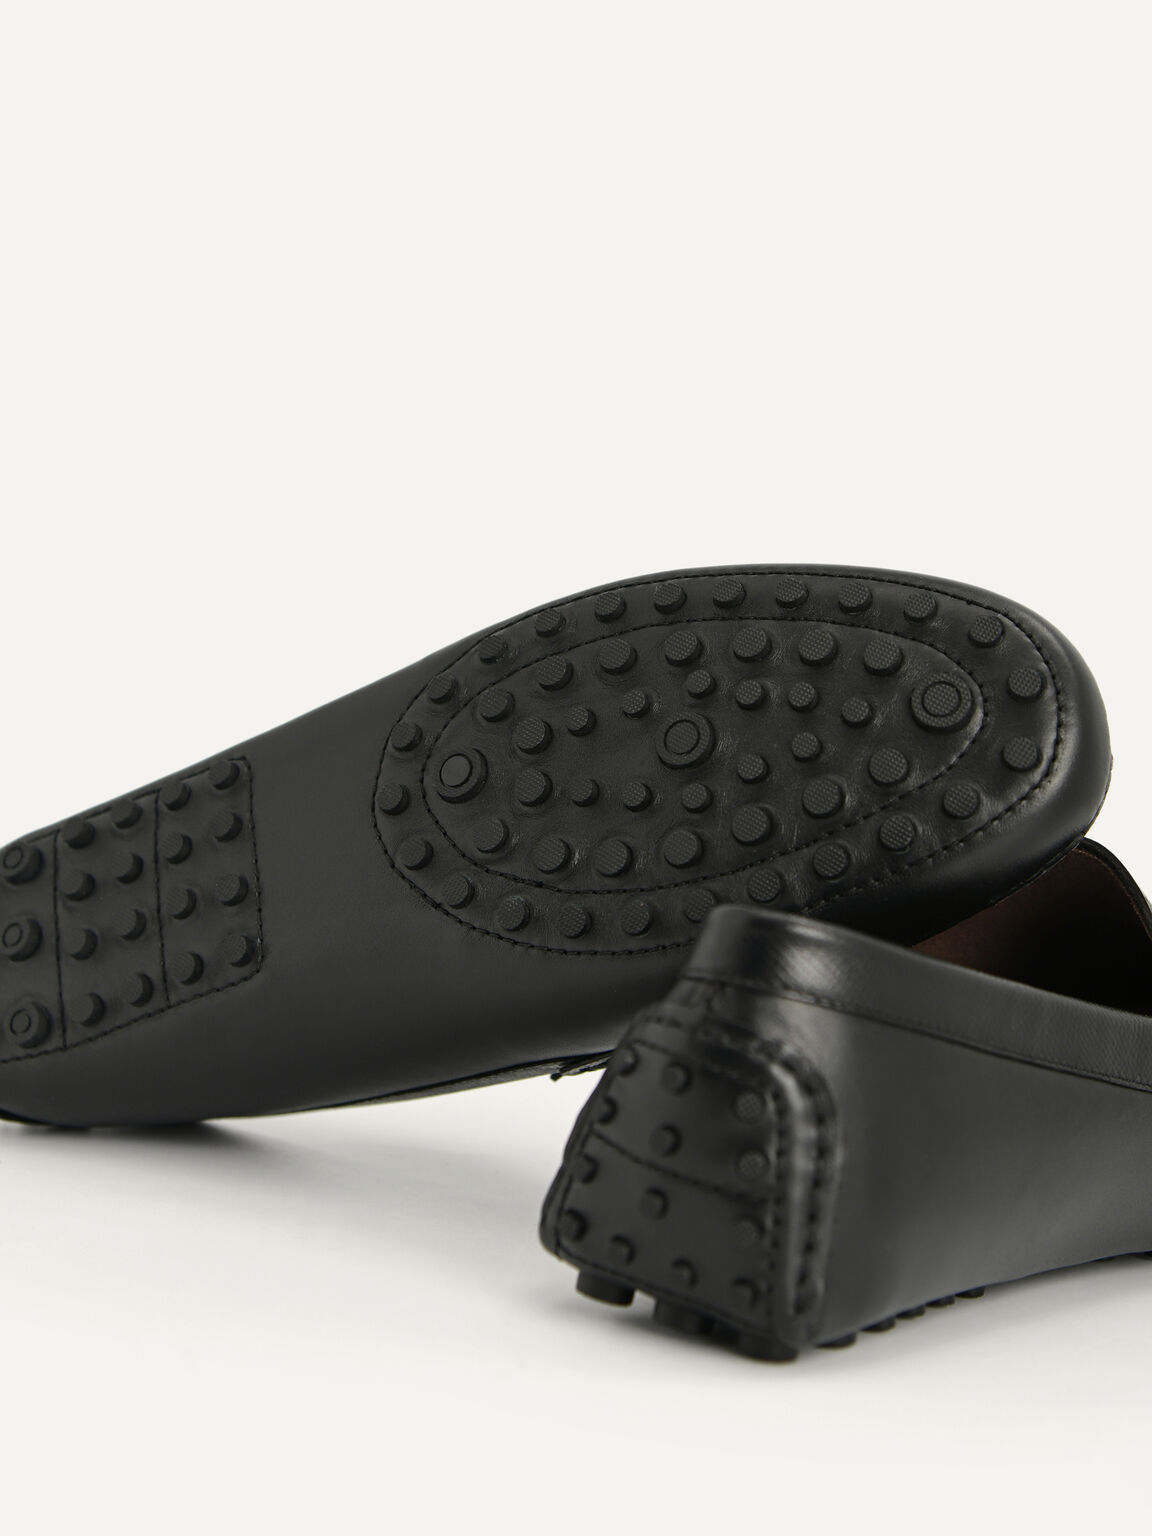 Icon leather Moccasins, Black, hi-res